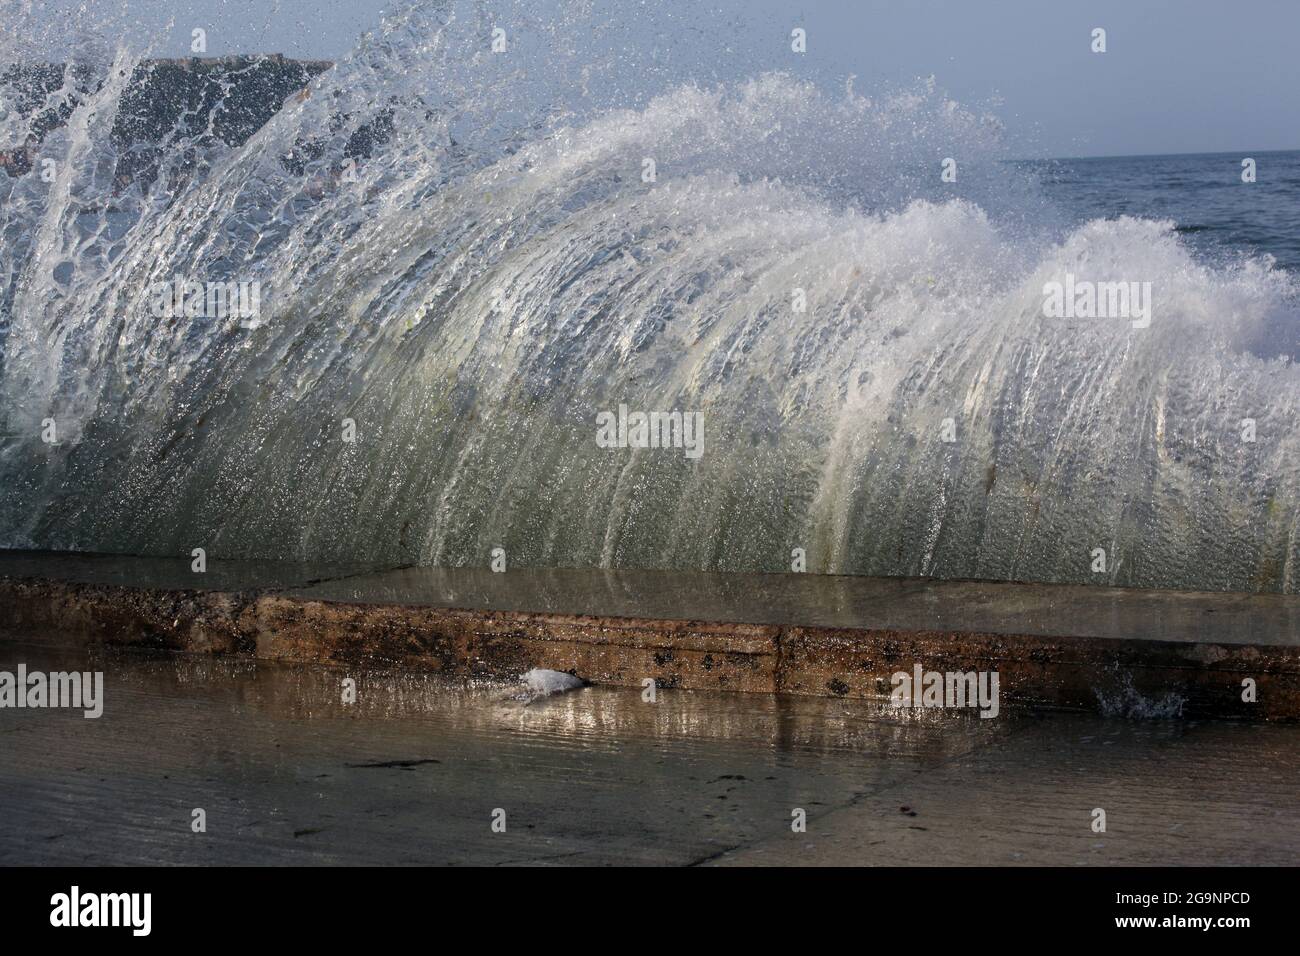 Waves hitting seawall an shooting up to from a curtain of water Stock Photo